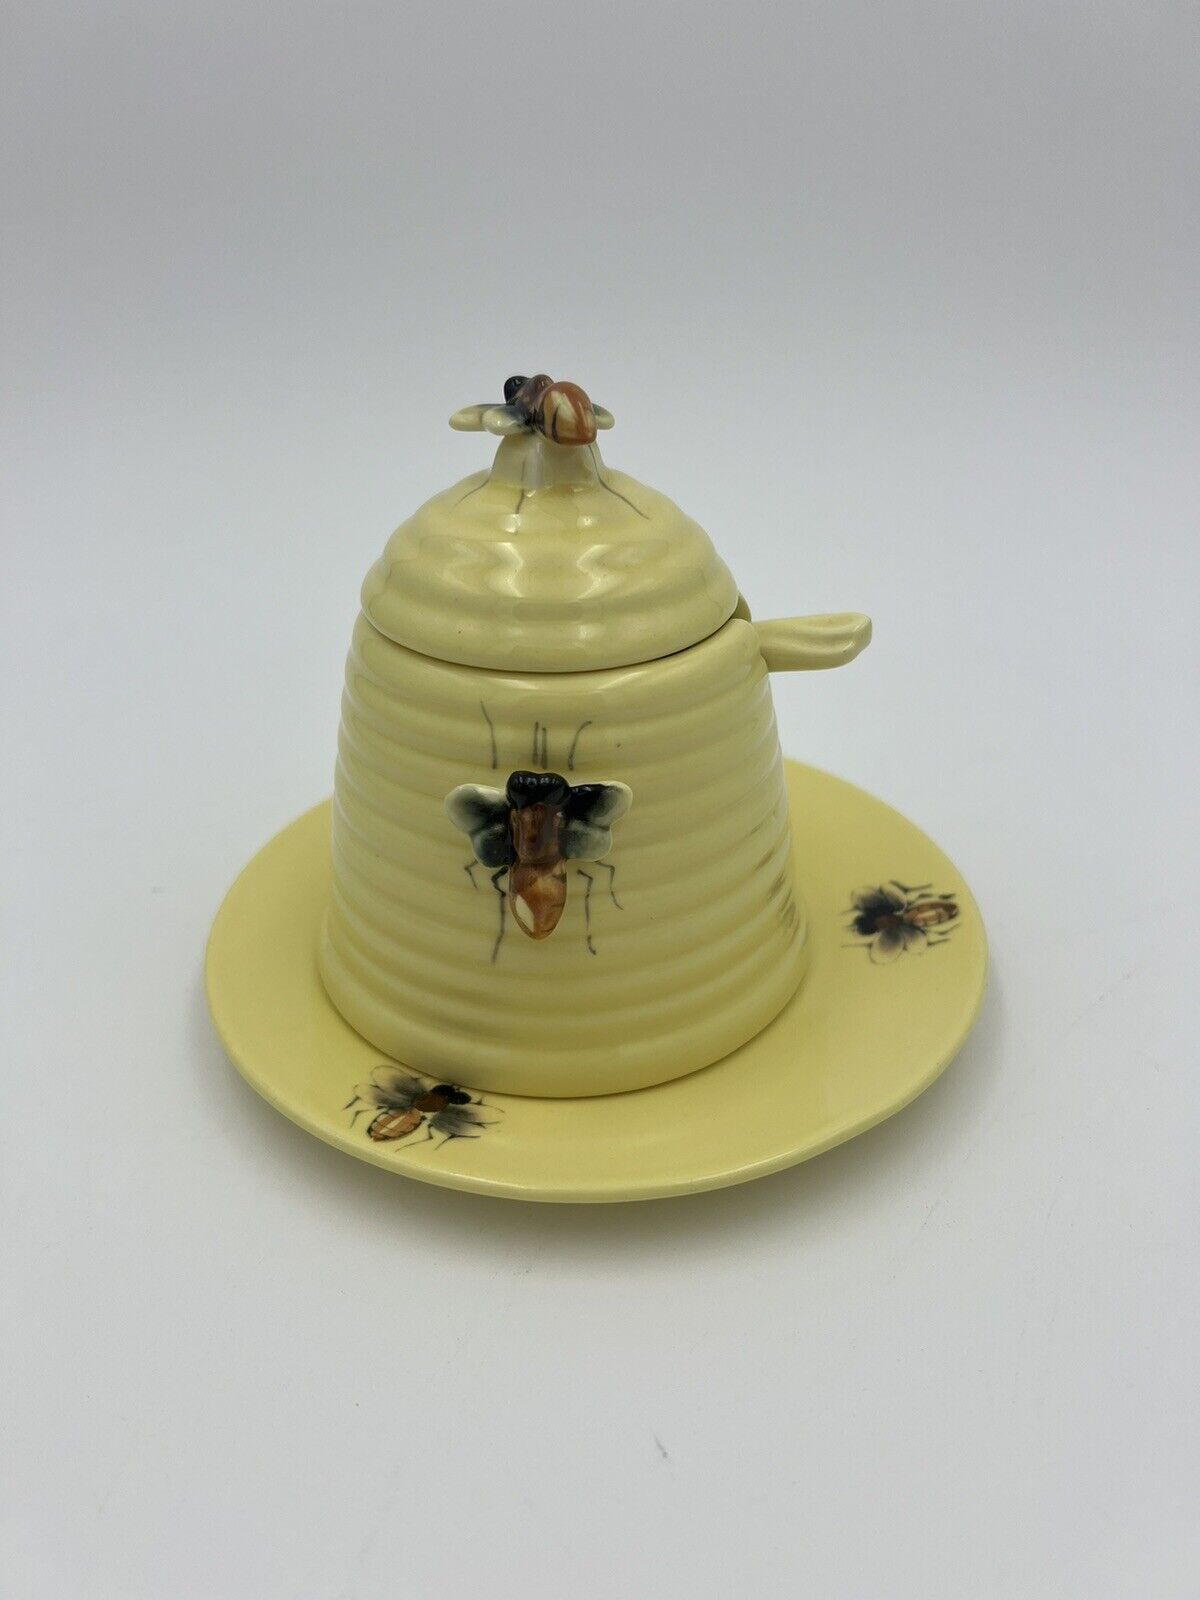 Vintage Ceramic Yellow Bee & Hive Honey Jar Pot With Ceramic Spoon Some Chips